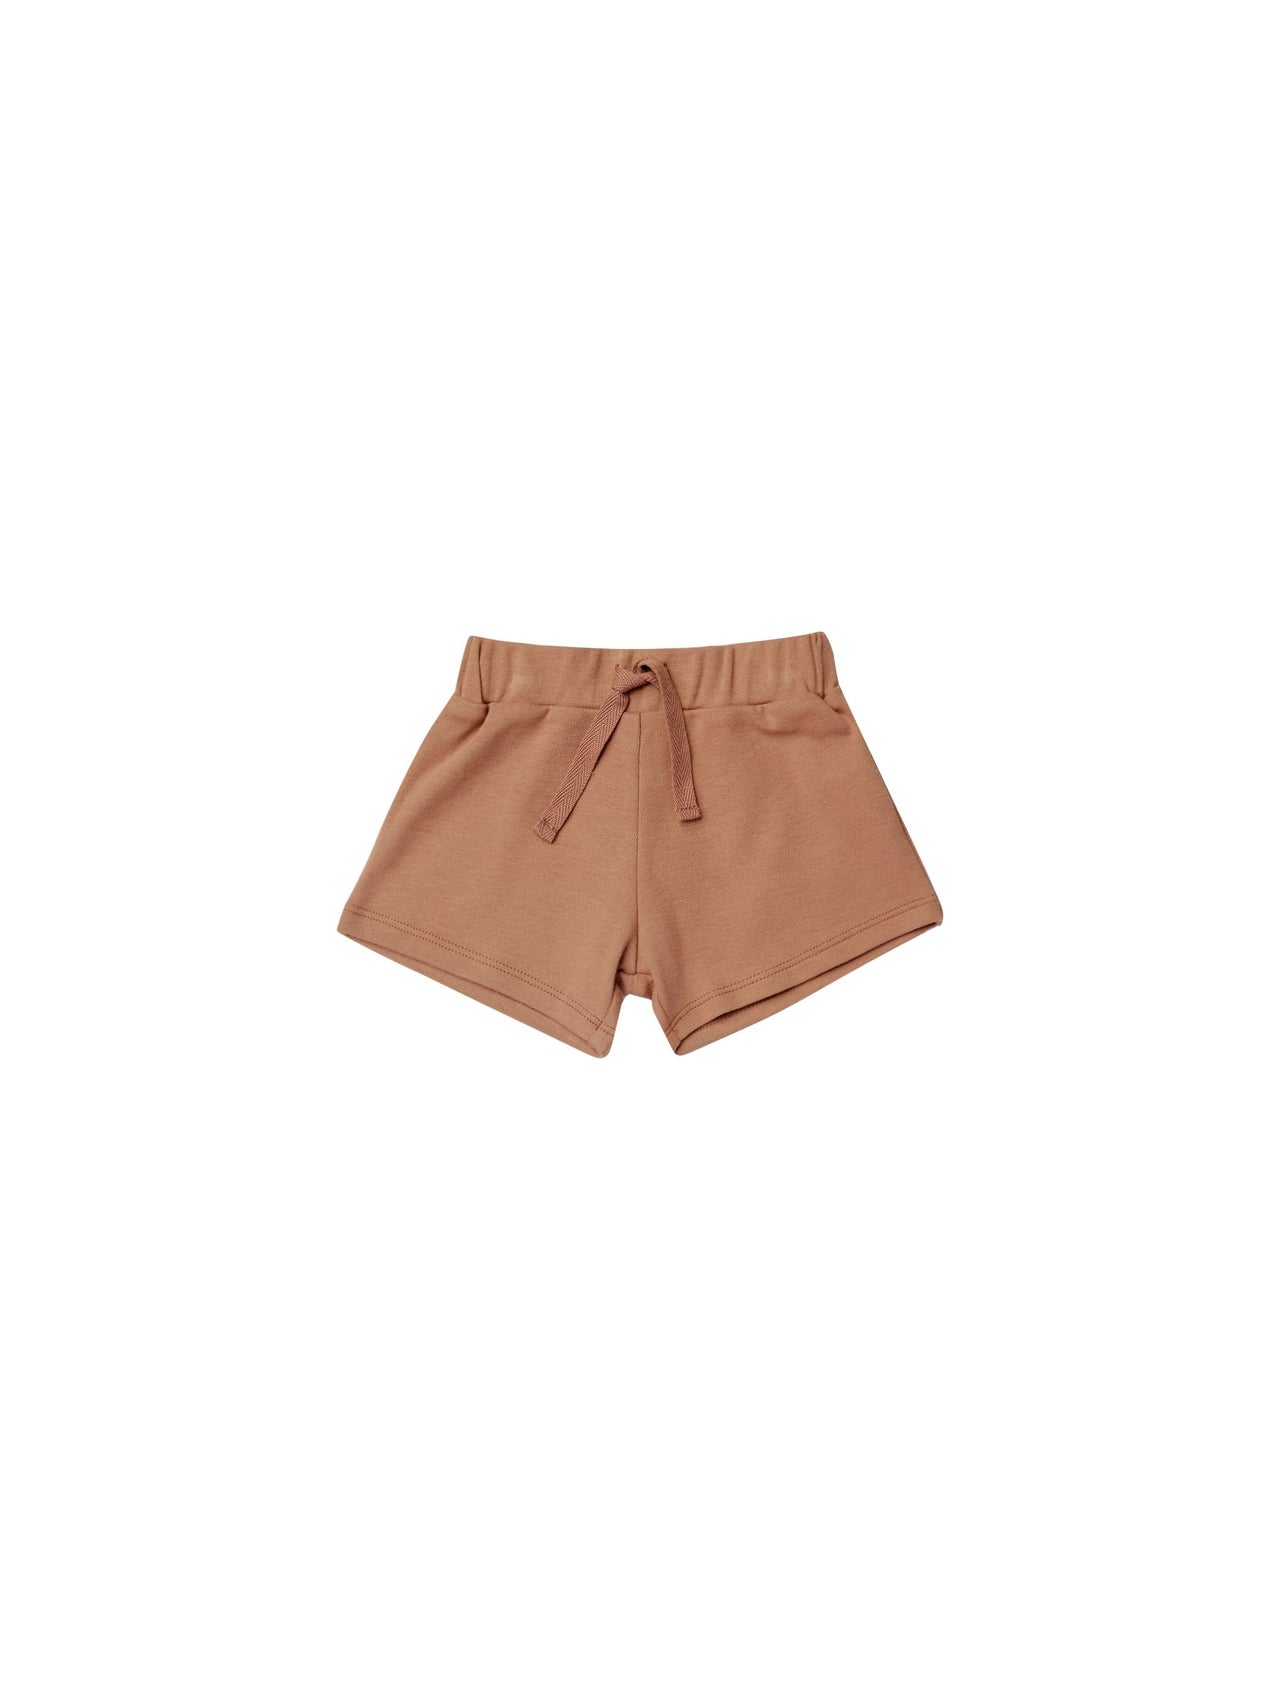 Quincy Mae Jersey Shorts, Clay